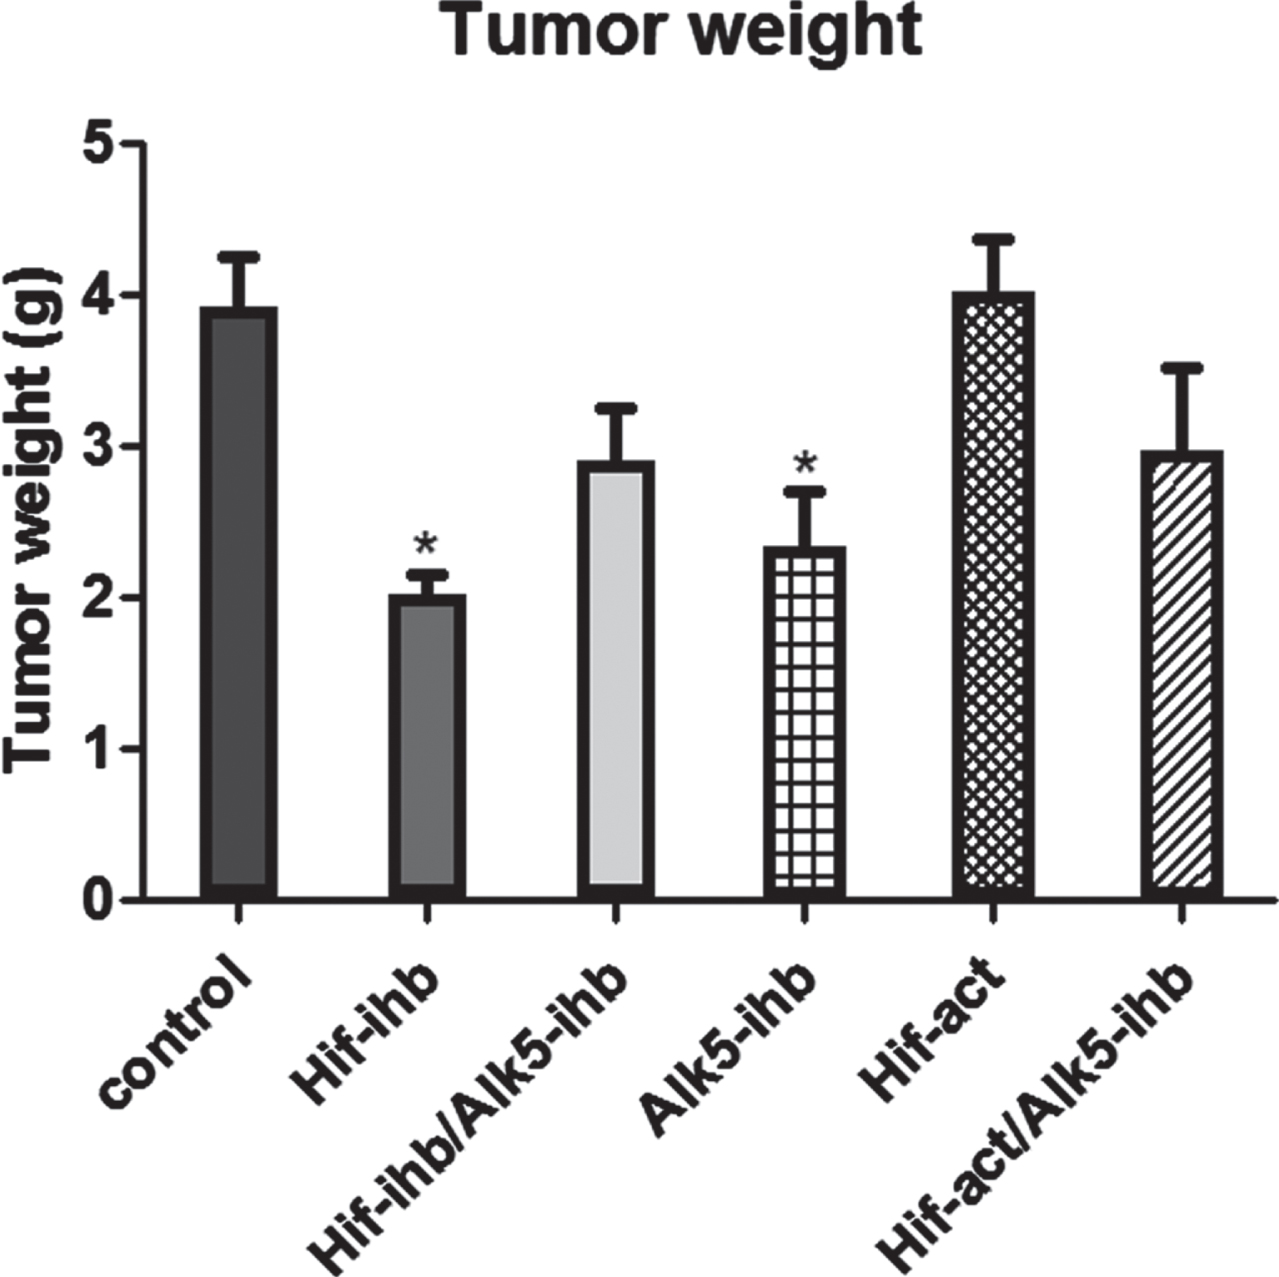 Tumor weights on the last day of the experiments. Tumor weight significantly decreased in the HIF-ihb (**p < 0.01) and ALK5-ihb (*p < 0.05) groups. Each bar represents mean±SEM. Alk5-ihb: ALK5 inhibitor, HIF-ihb: HIF-1α inhibitor, HIF-act: HIF-1α activator.